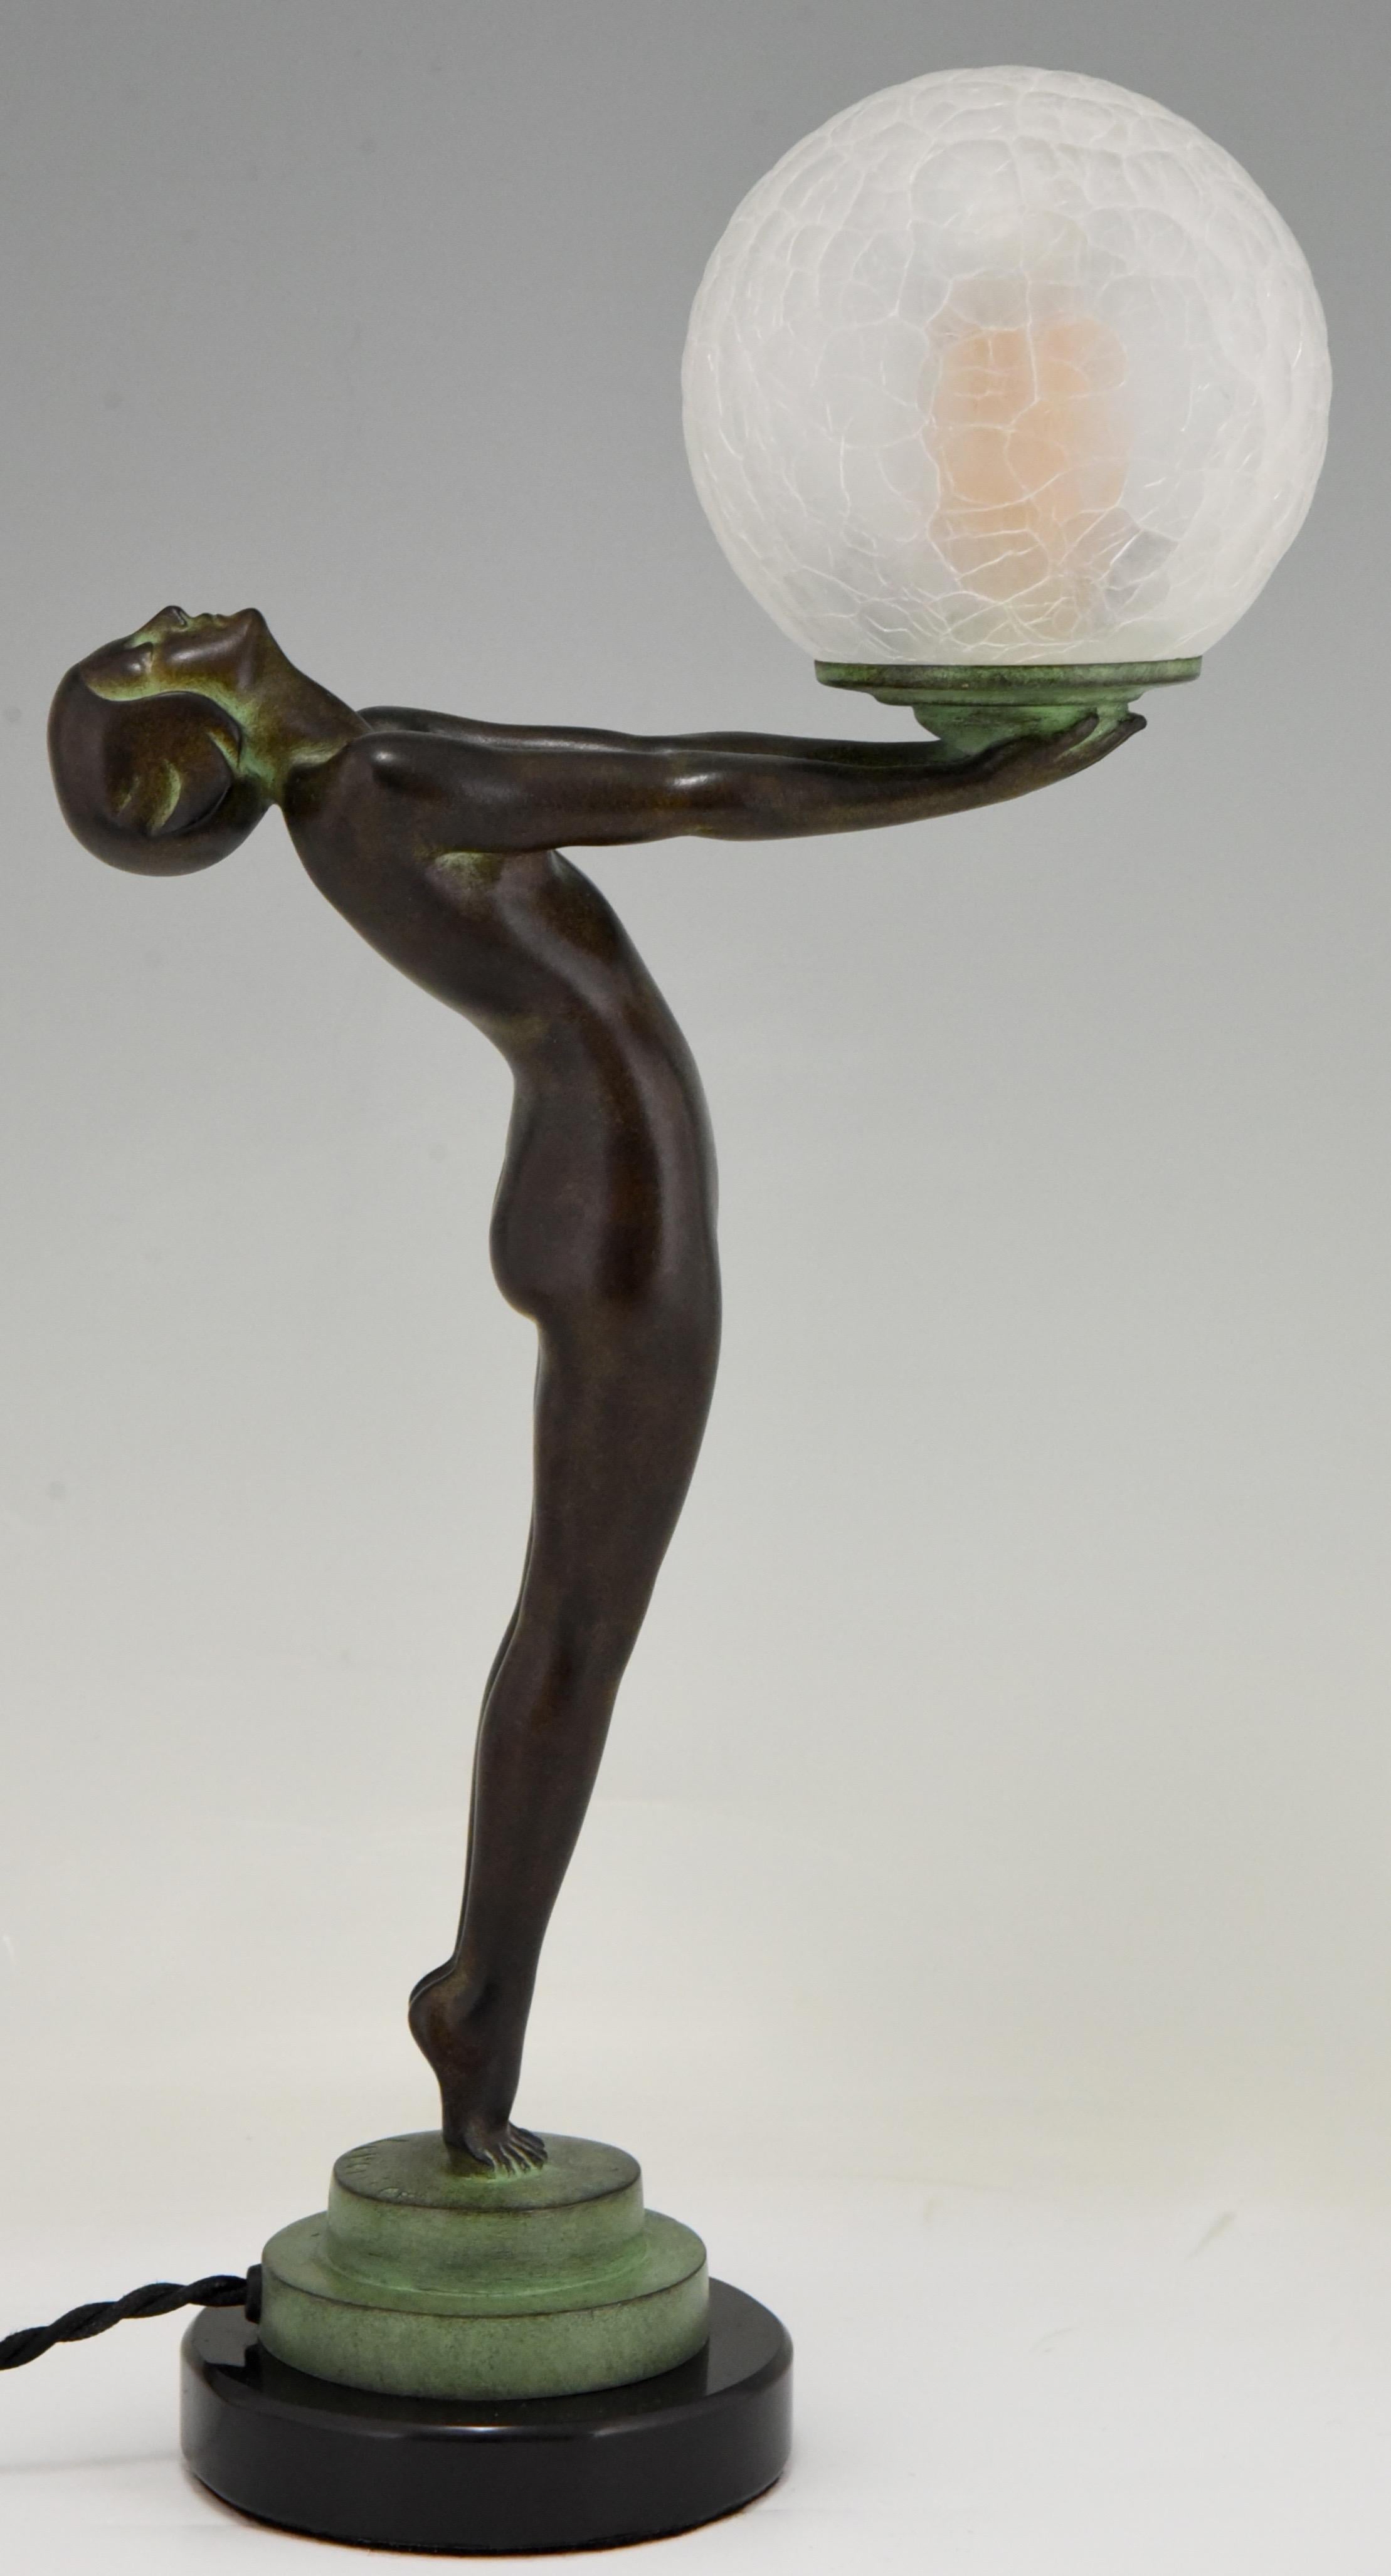 Pair of Art Deco Style Lamps Clarté Standing Nude with Globe by Max Le Verrier For Sale 2